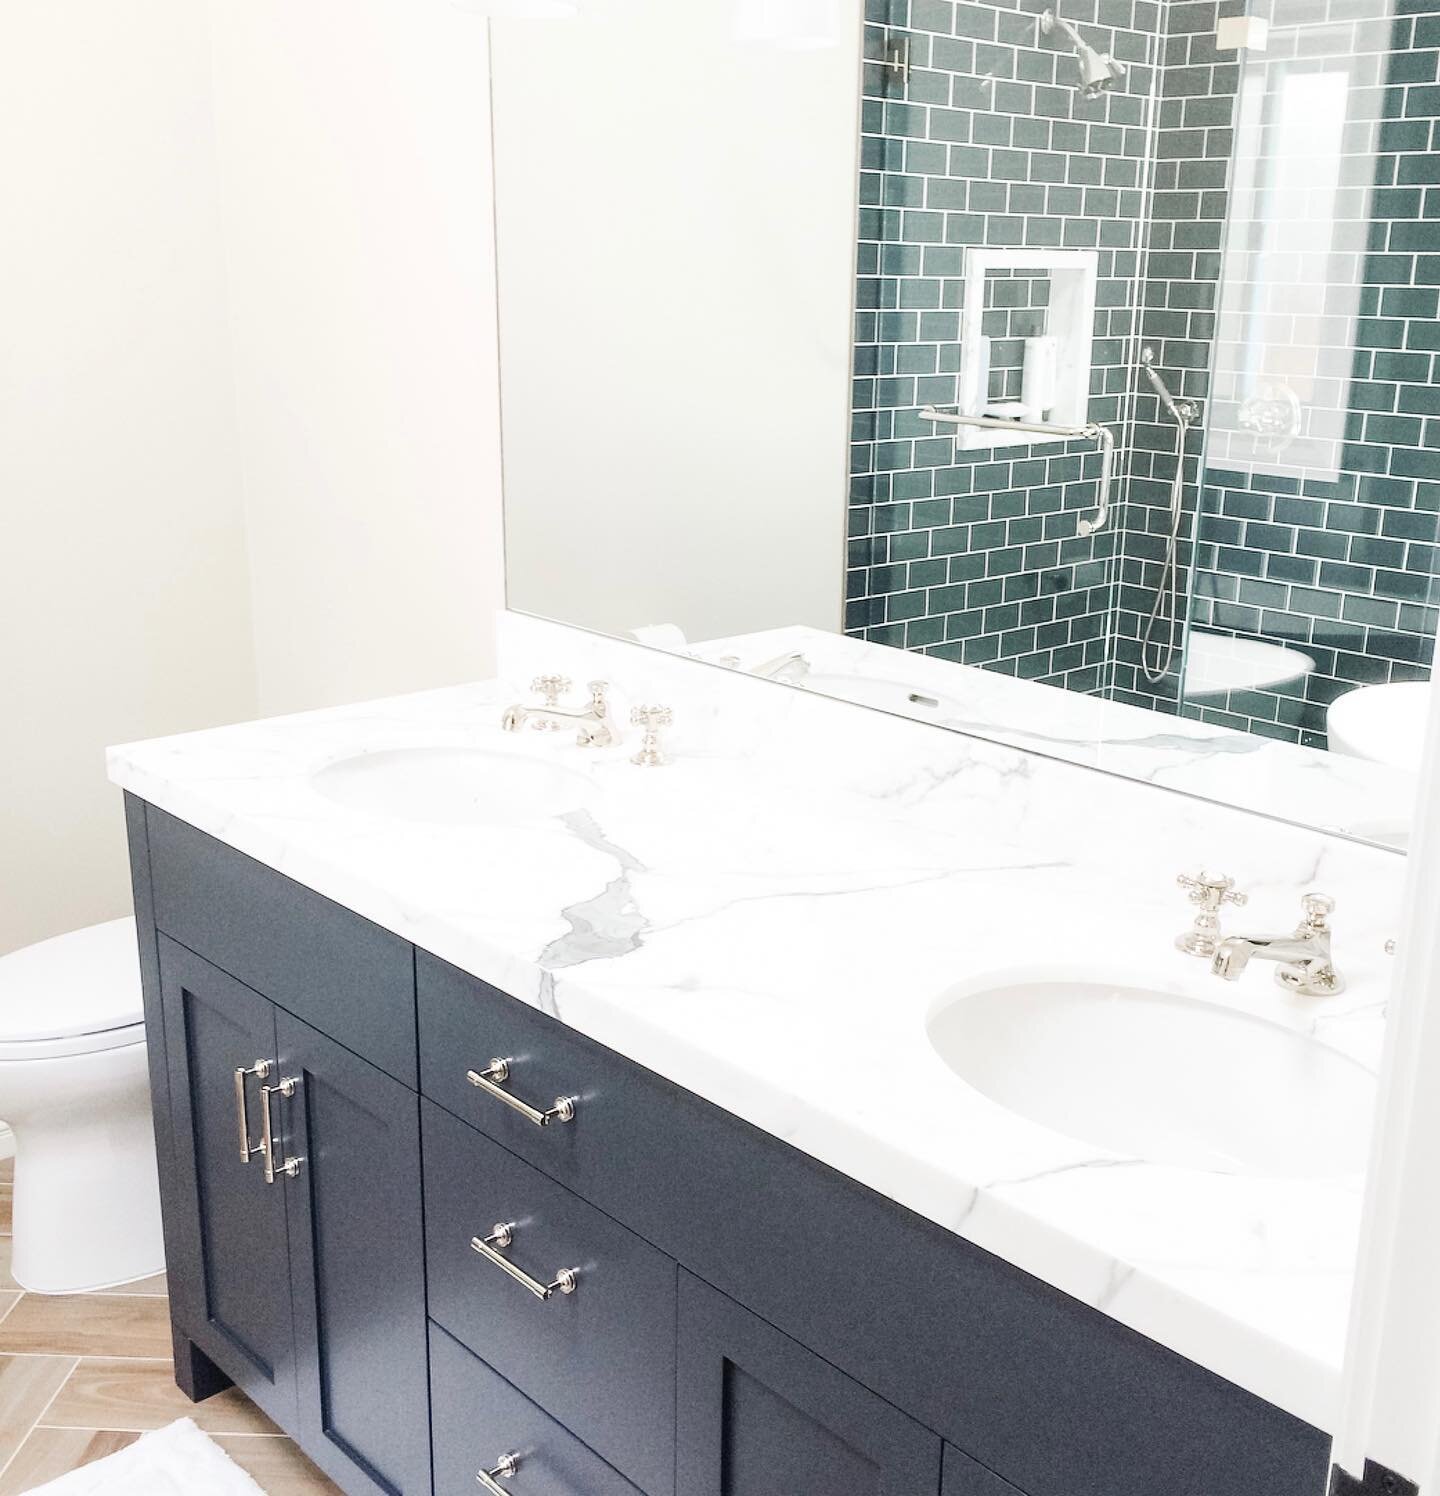 Sometimes my clients are afraid to use a bold color. You do not need to be! This bathroom is the perfect example of using a dark tile while still having a bright, cheery outcome.